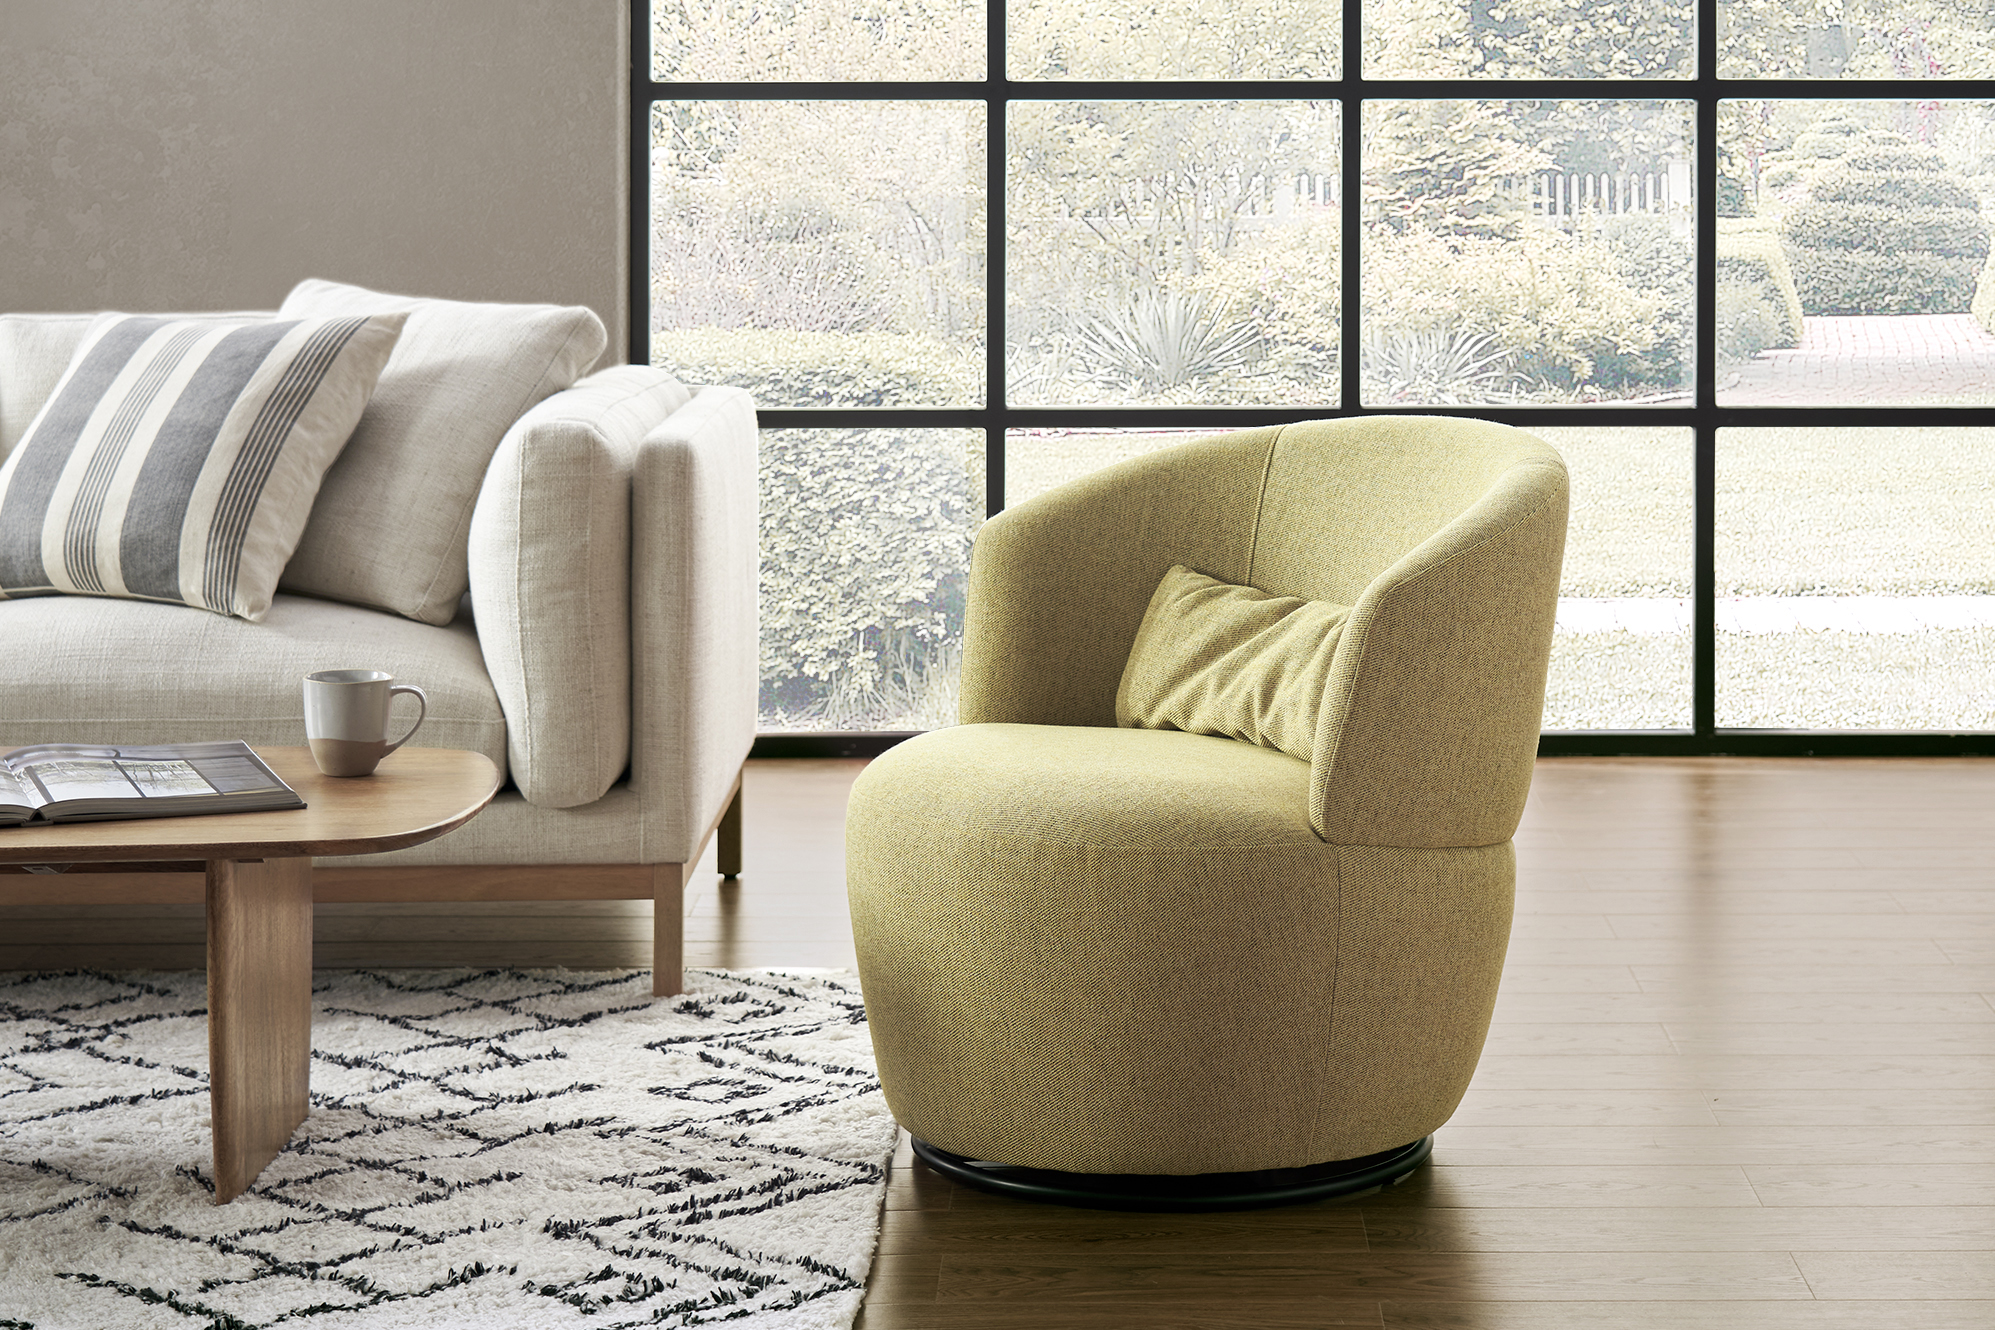 Swivel Chairs: Where to Buy Them and How to Style Them- Sunset Magazine